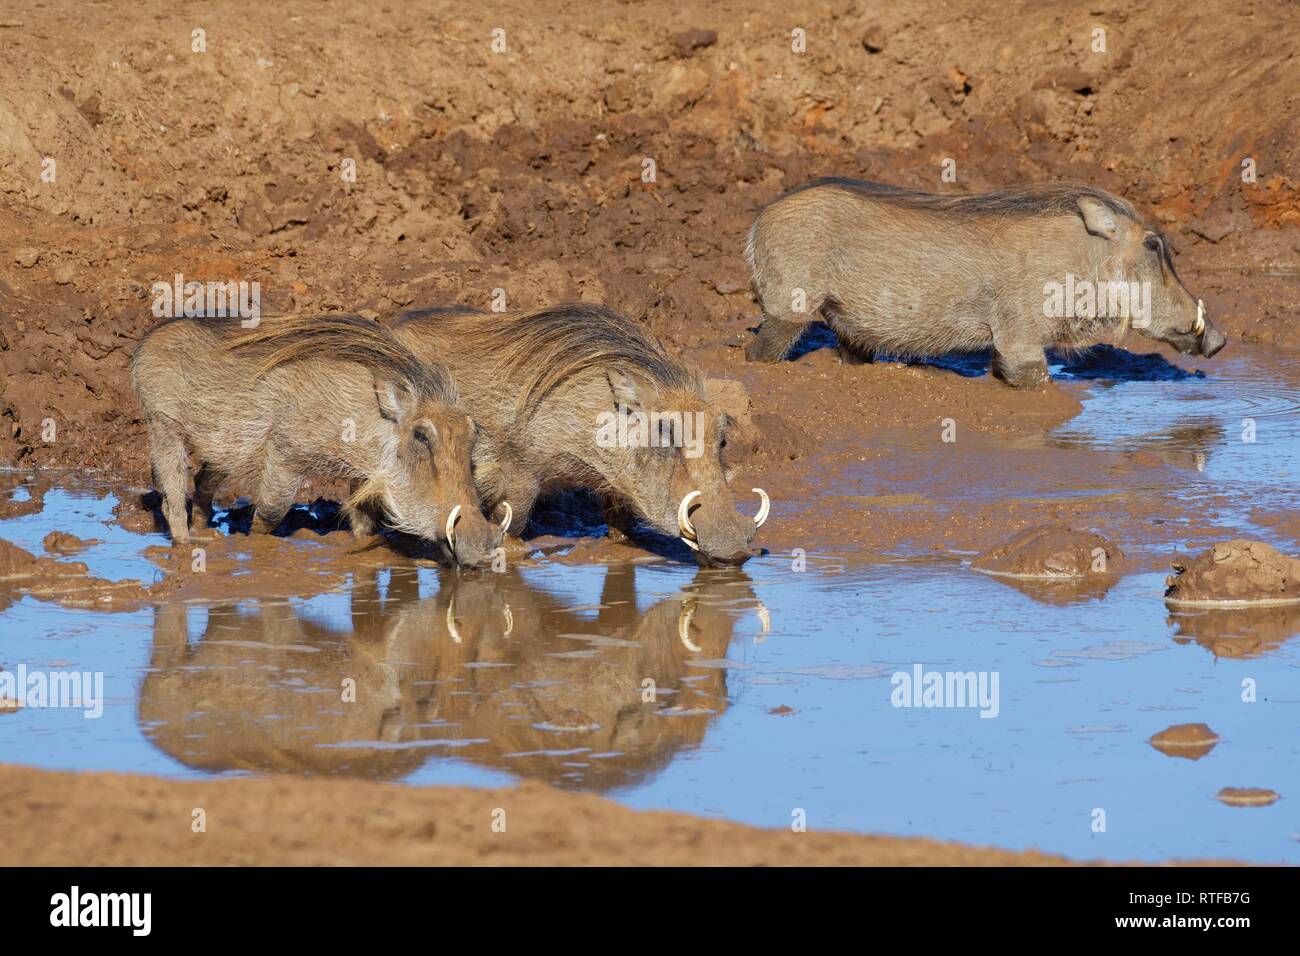 Common warthogs (Phacochoerus africanus), three adults in muddy water, drinking at a waterhole, Addo Elephant National Park Stock Photo